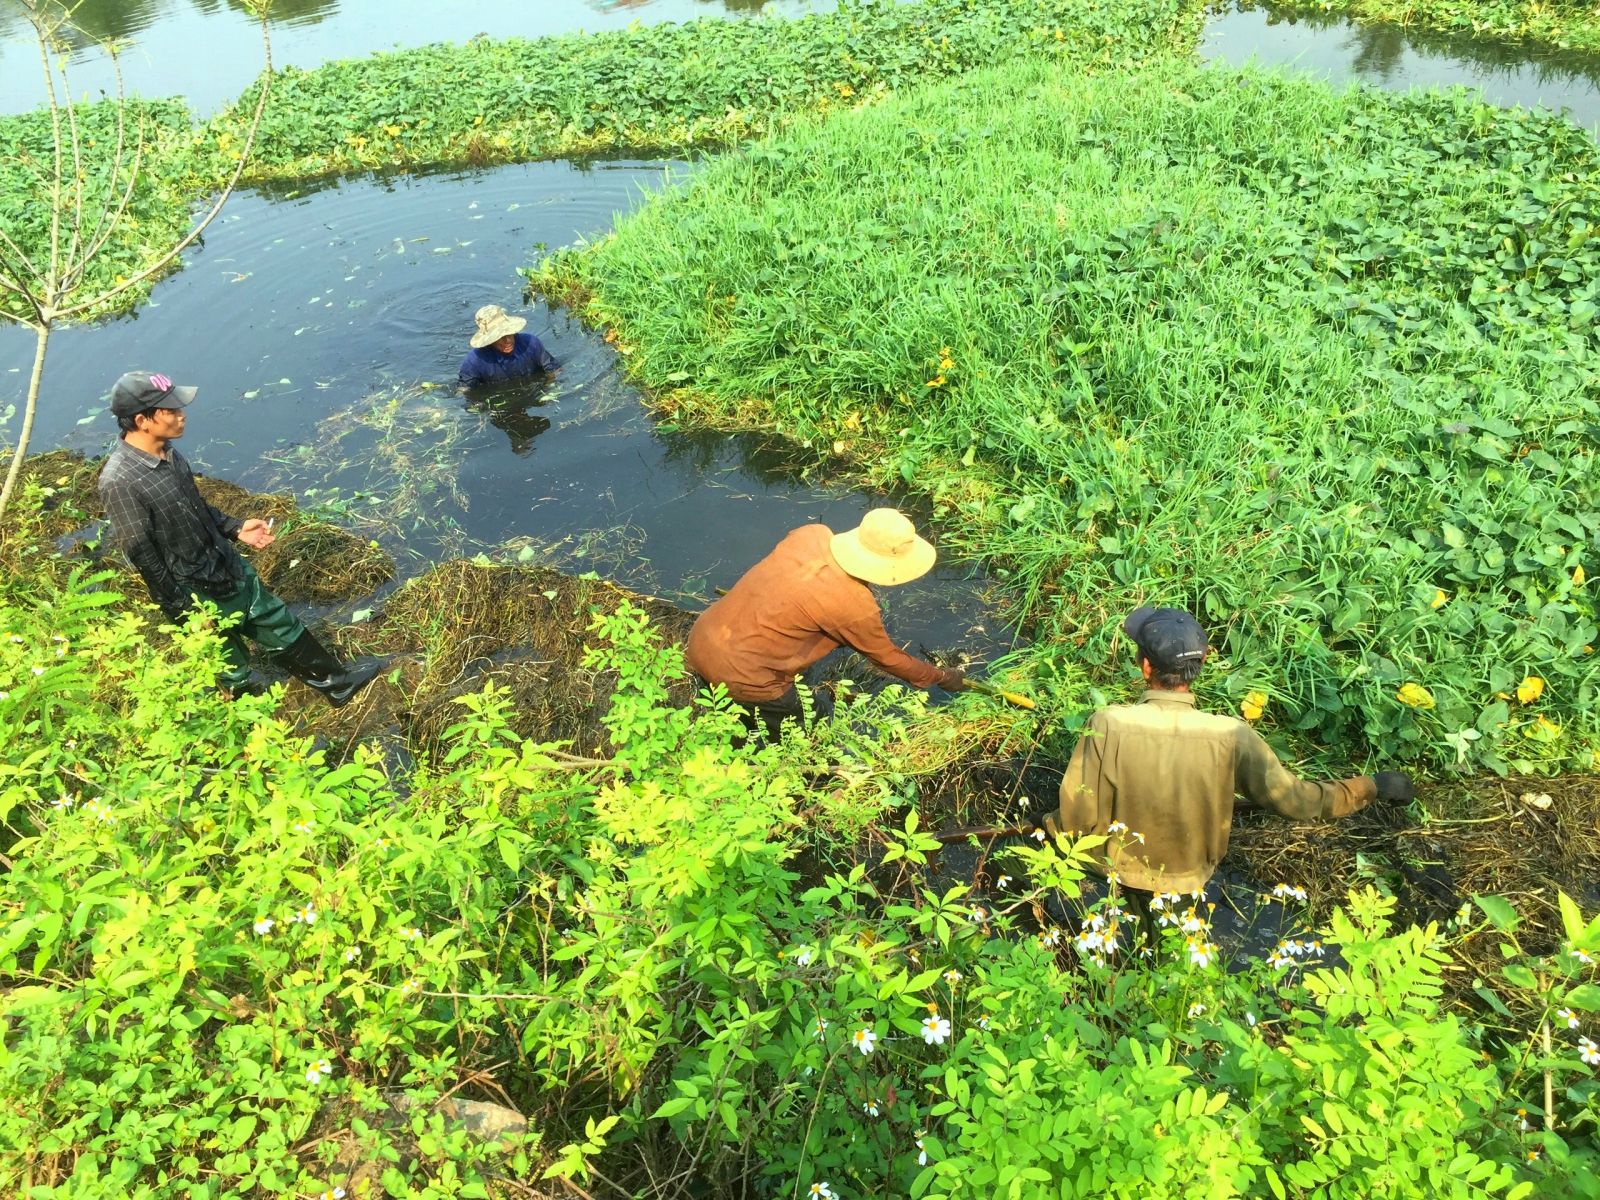 To plant lotus, project implementers have struggled to clean the water surface